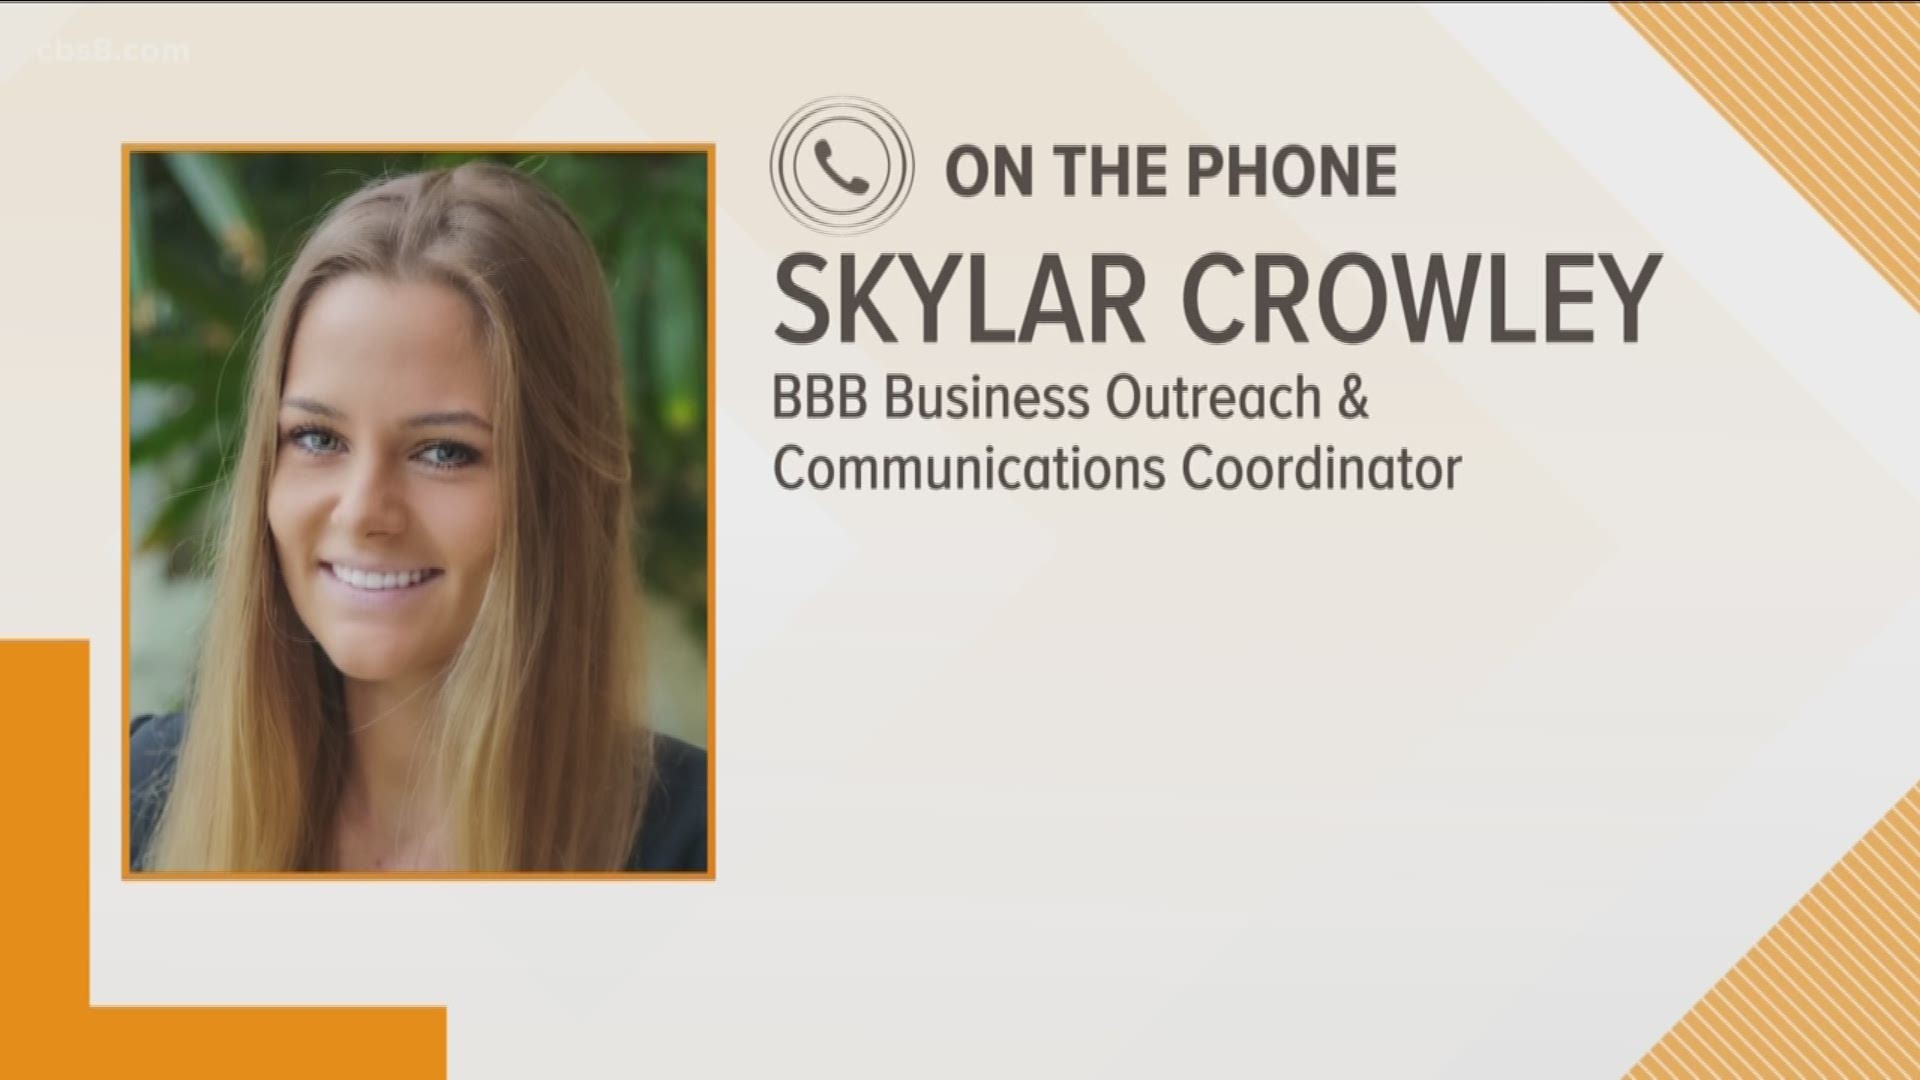 Skylar Crowley from the BBB joined Morning Extra to talk about some of the recent scams popping up due to the coronavirus & what you should do to keep yourself safe.